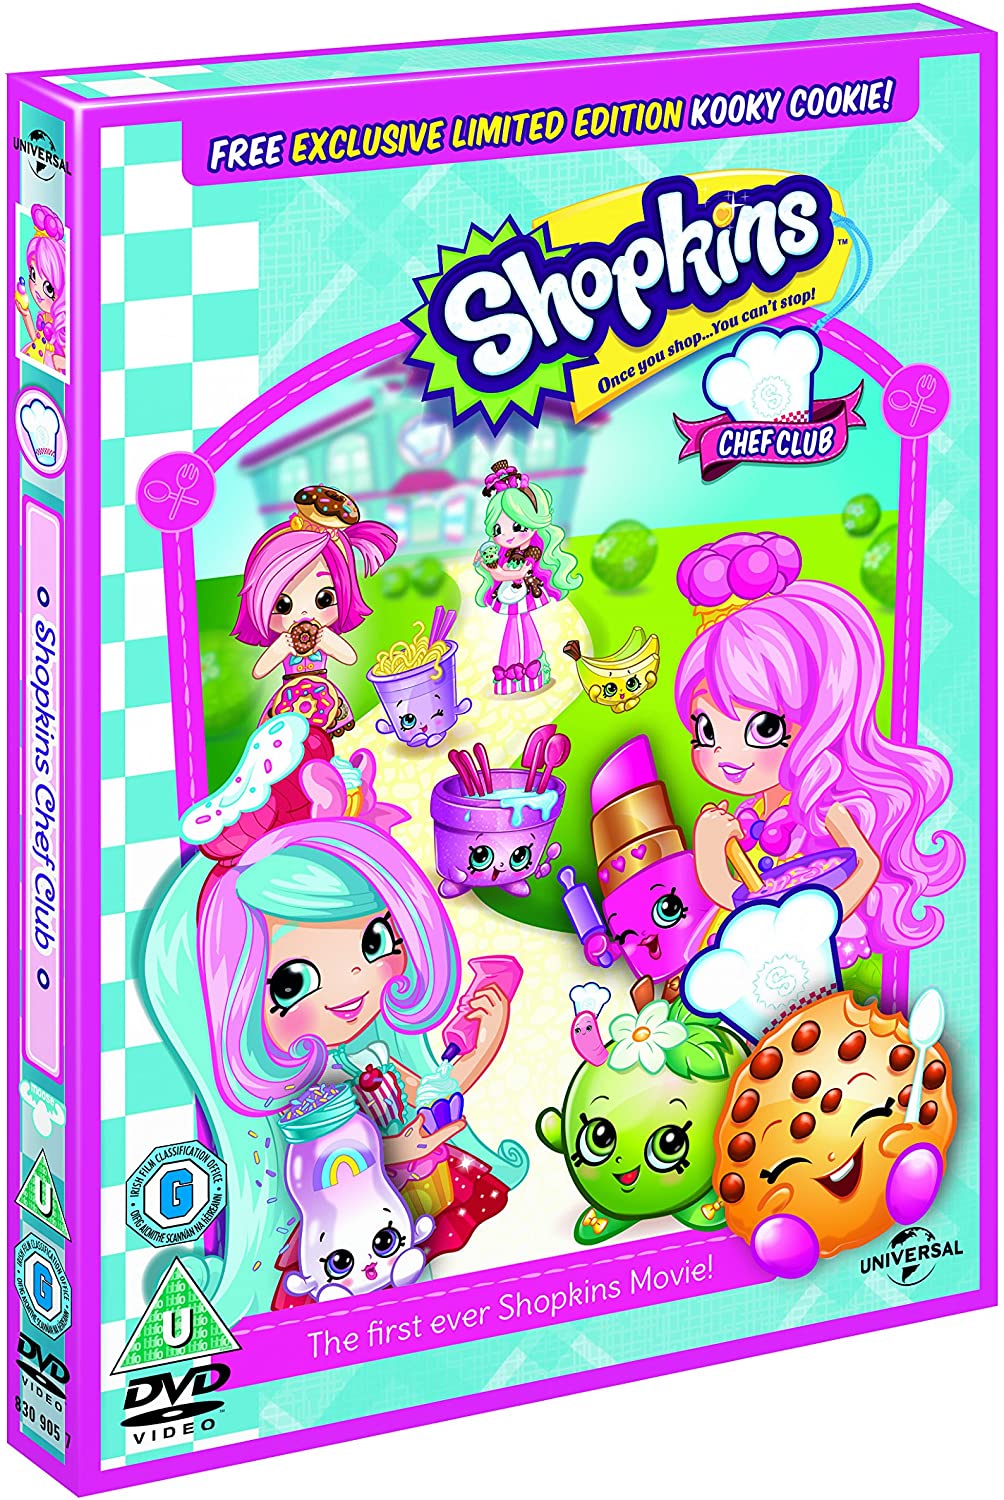 Shopkins: Chef Club [Includes Limited Edition Kooky Cookie Gift] (DVD)